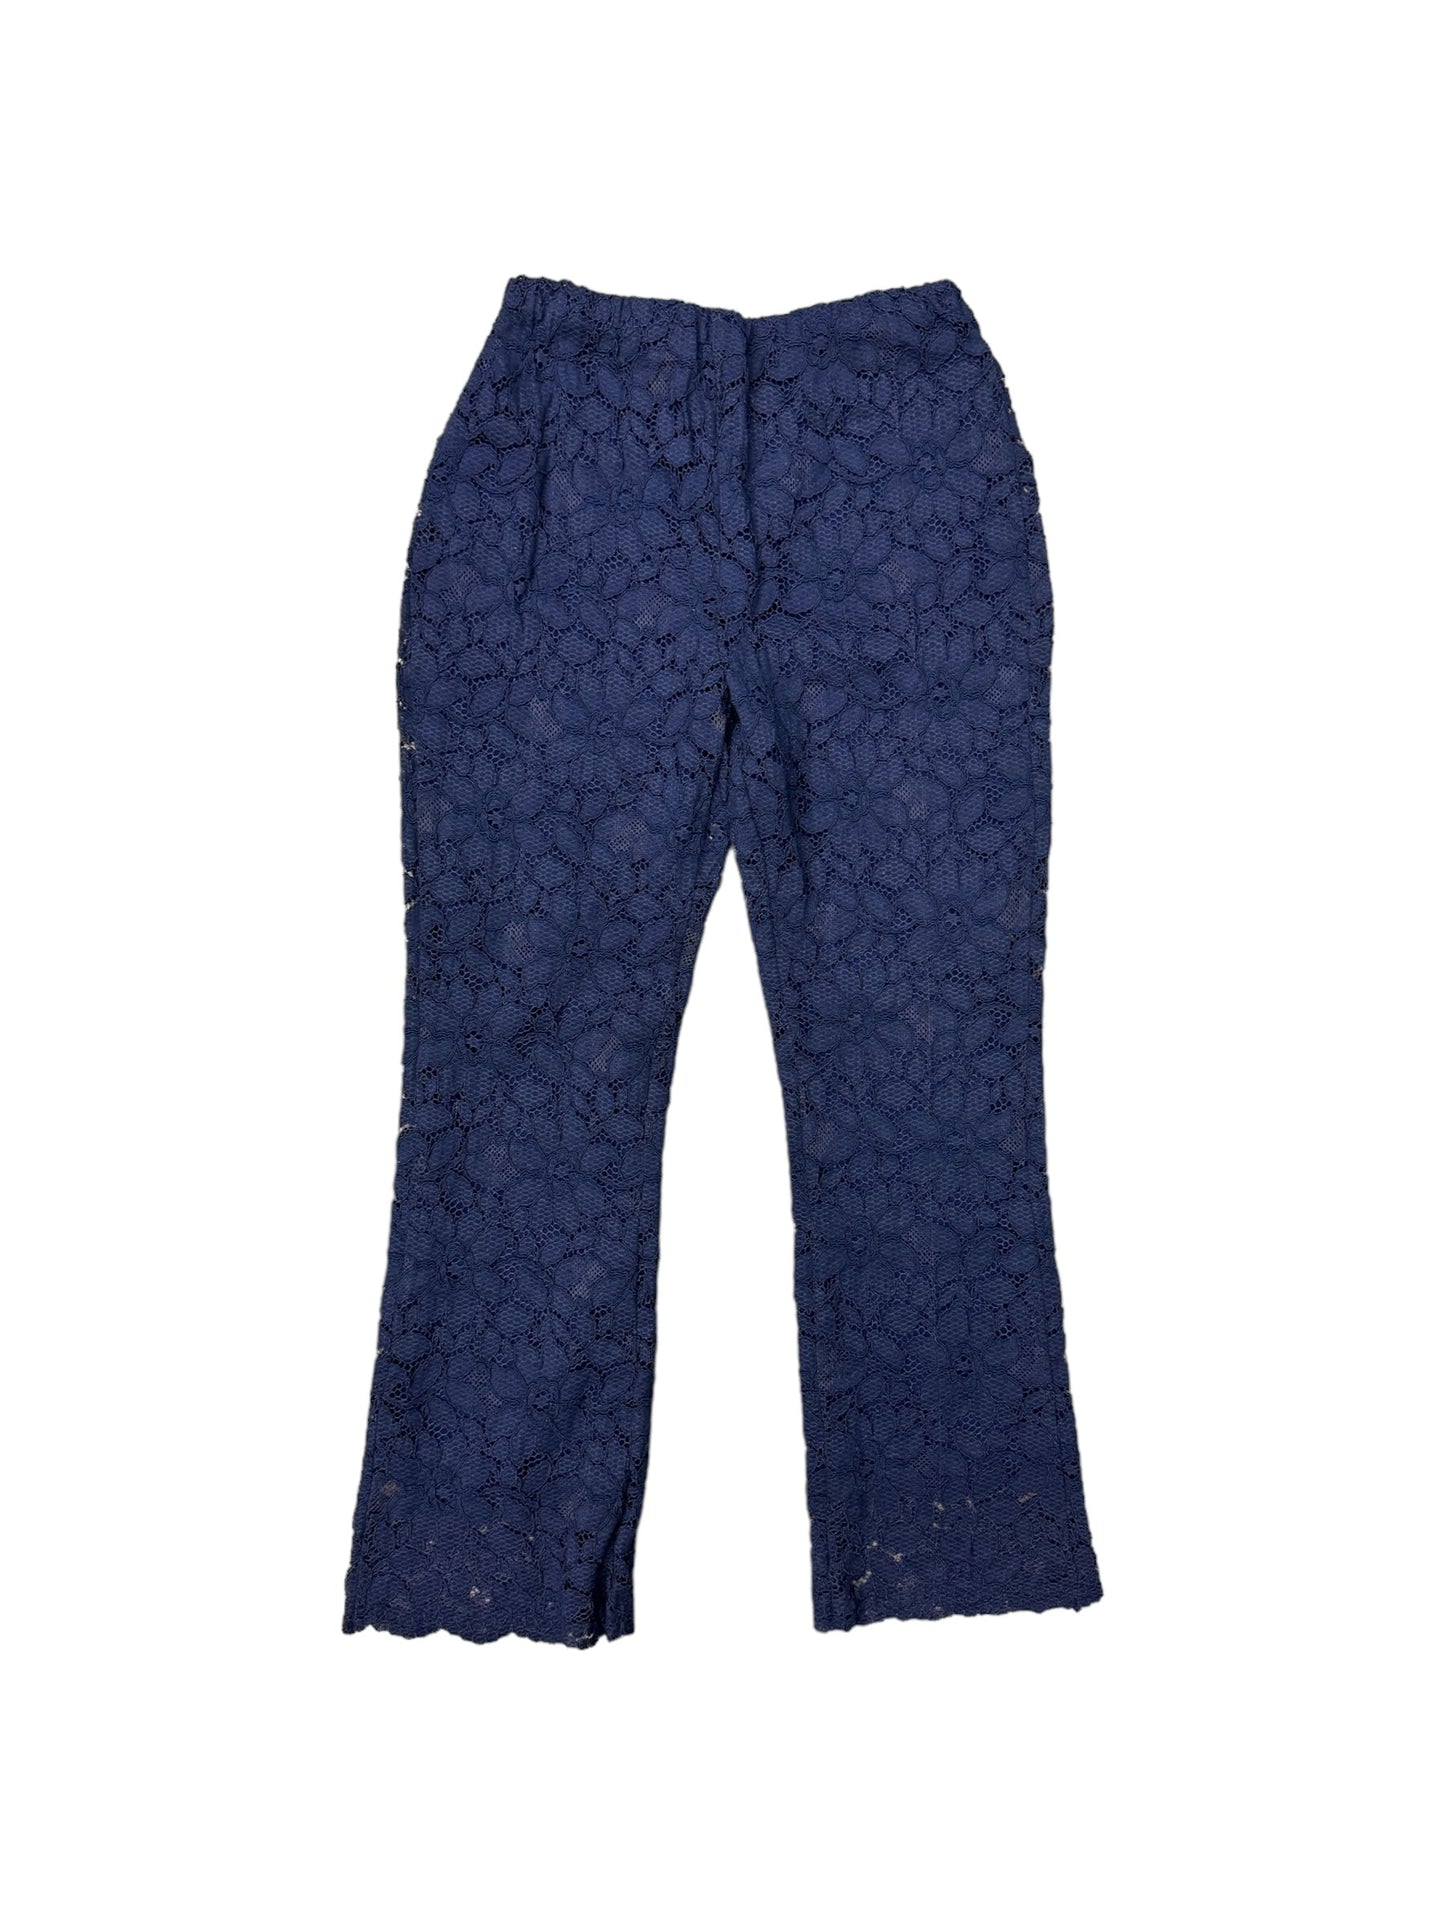 Blue Pants Other Free People, Size 4